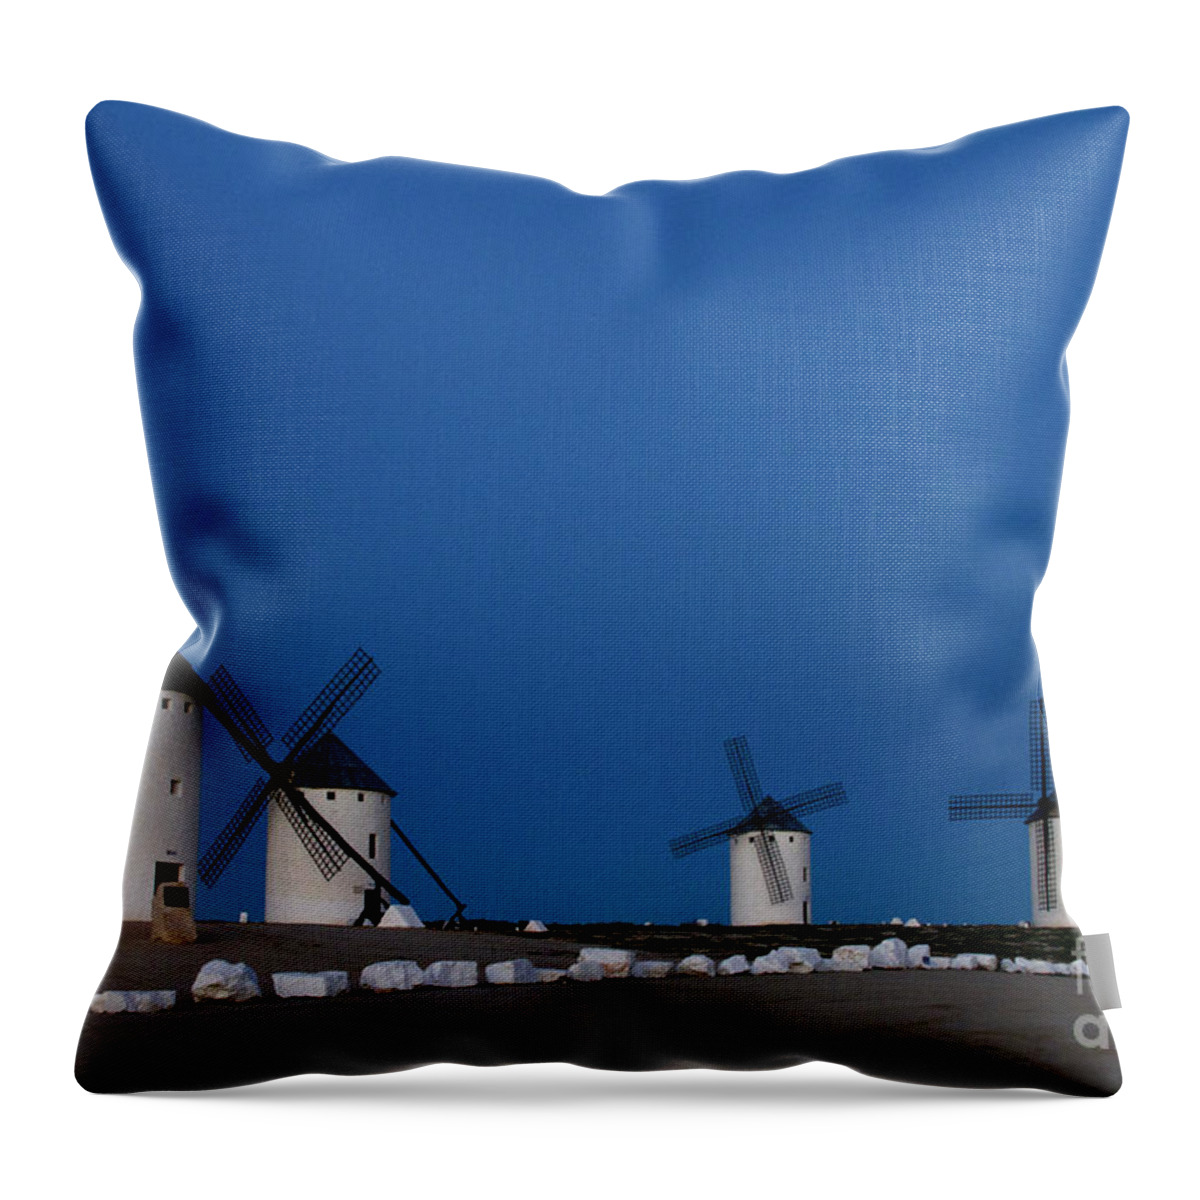 Landscape Throw Pillow featuring the photograph La Mancha Windmills by Heiko Koehrer-Wagner